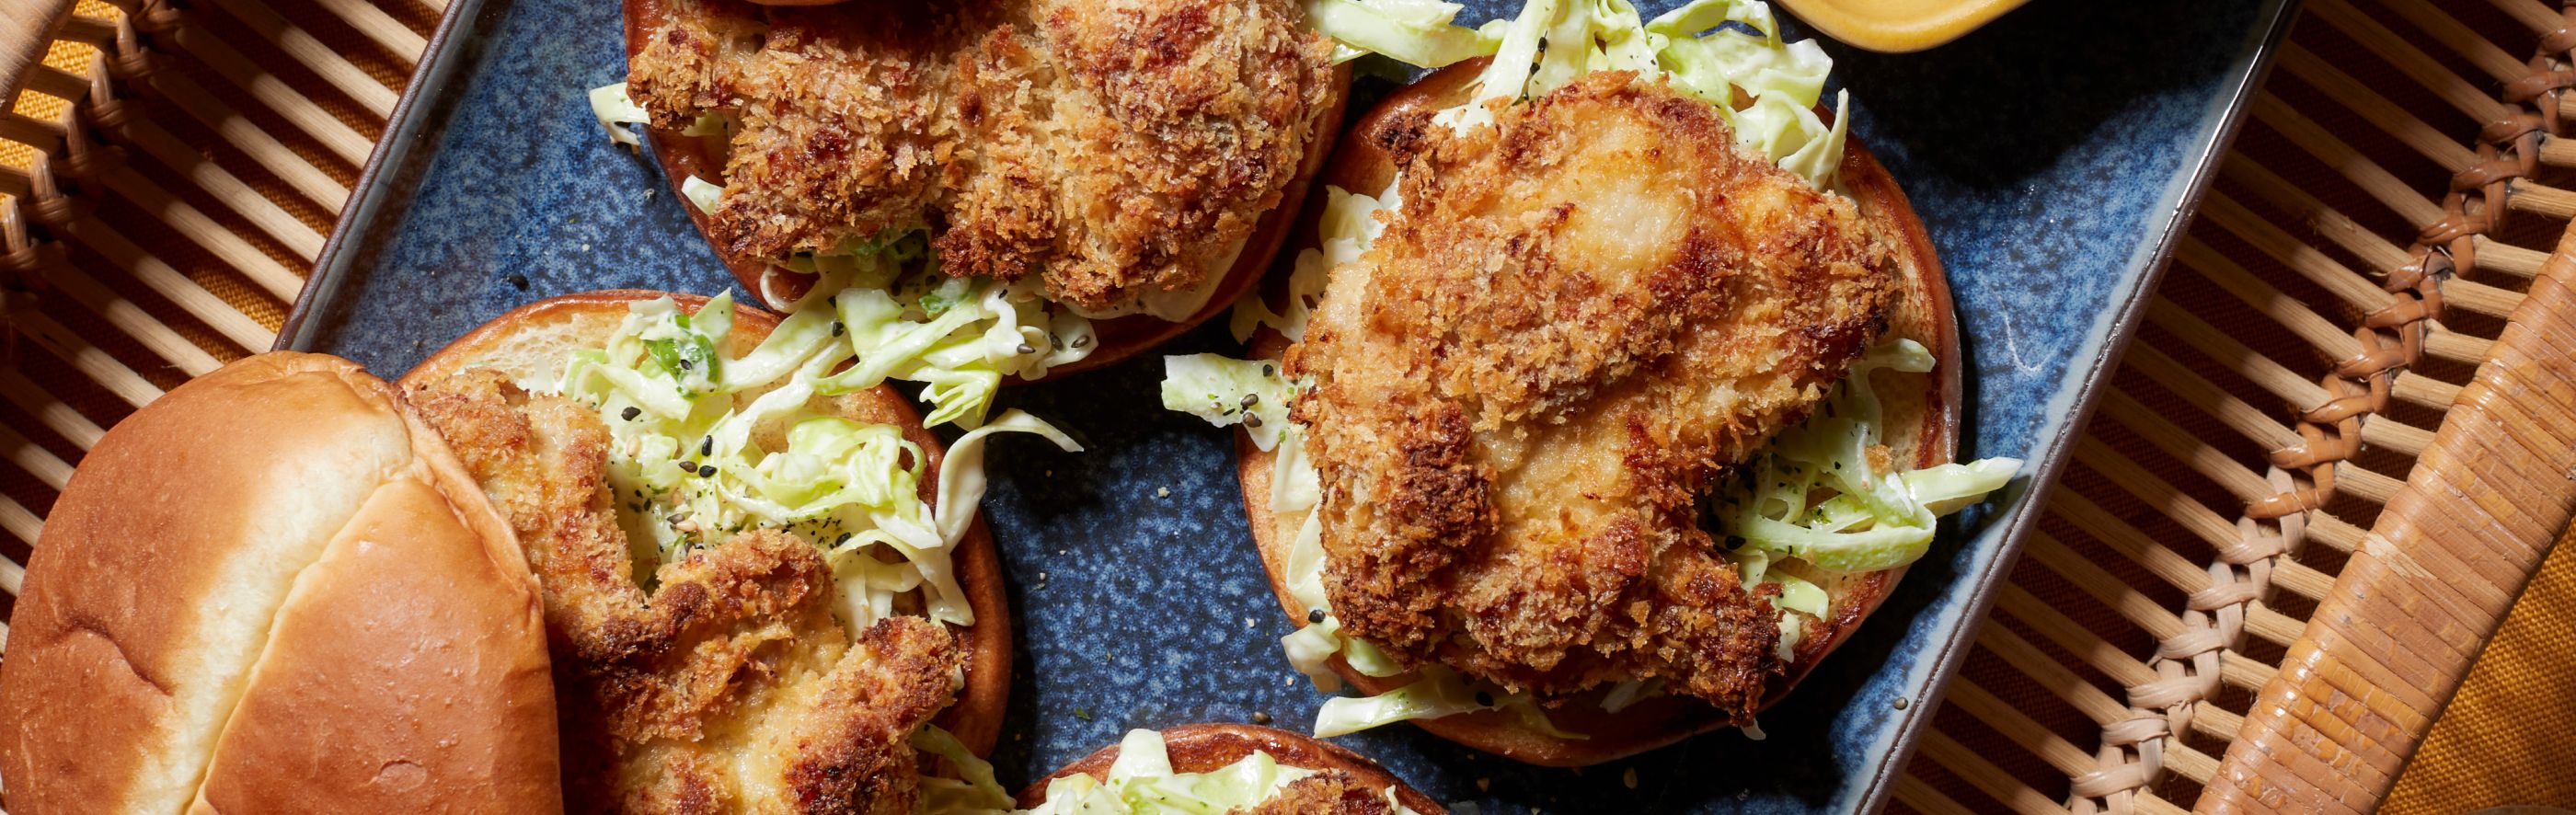 Air fried chicken sandwiches on a plate